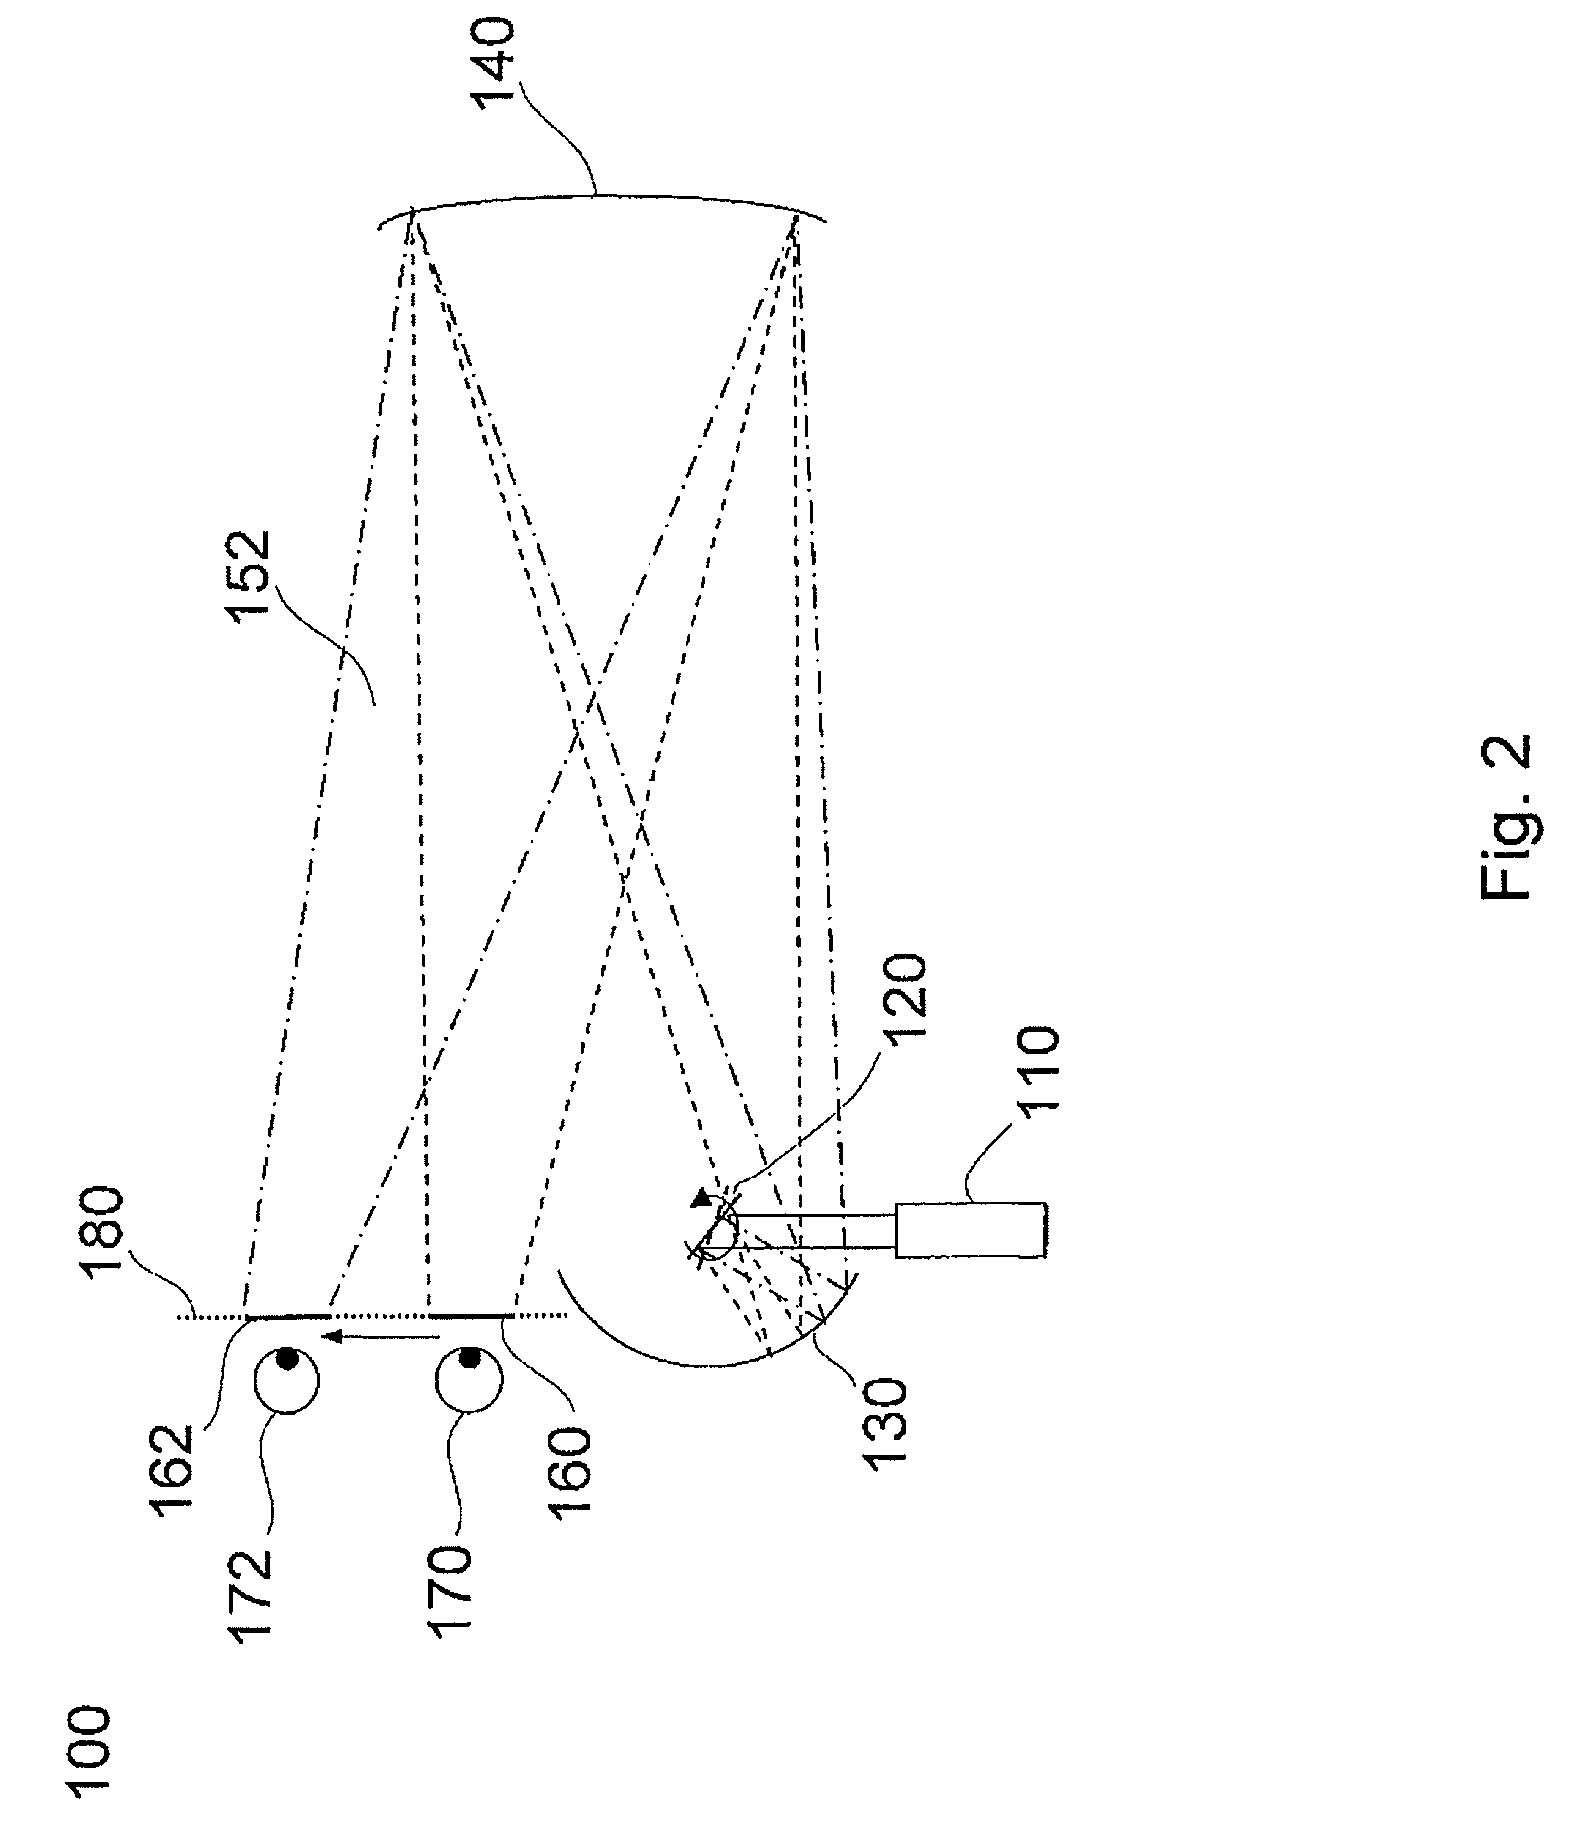 Holographic reconstruction system and method with a sequence of visibility regions